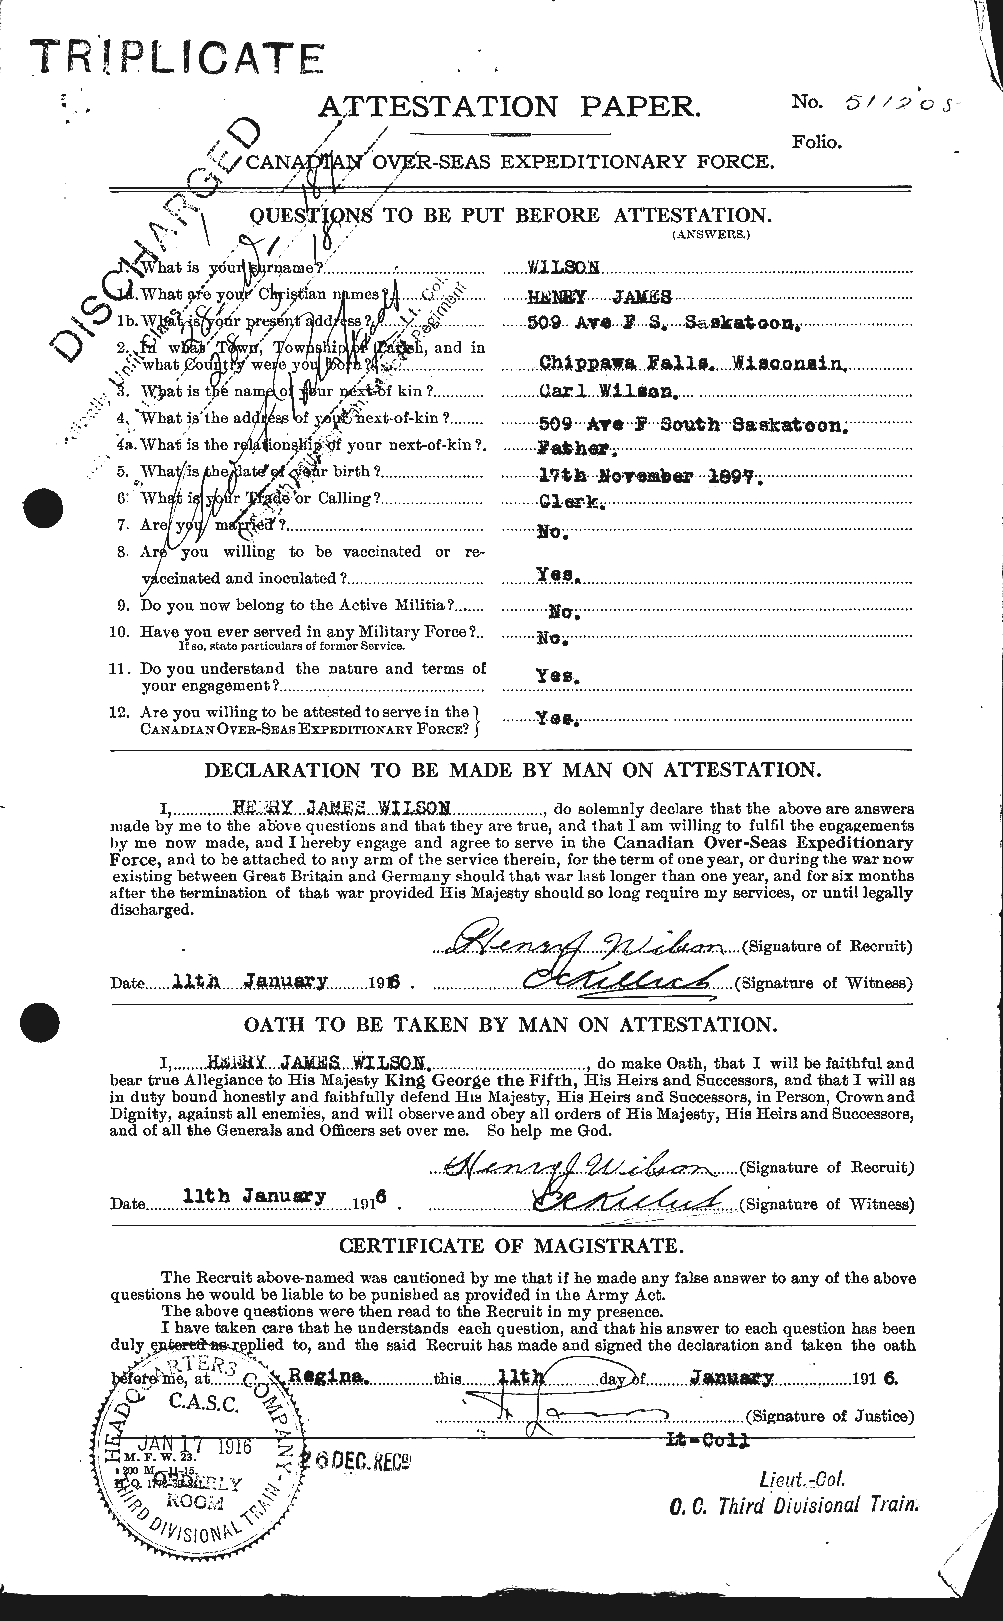 Personnel Records of the First World War - CEF 679531a